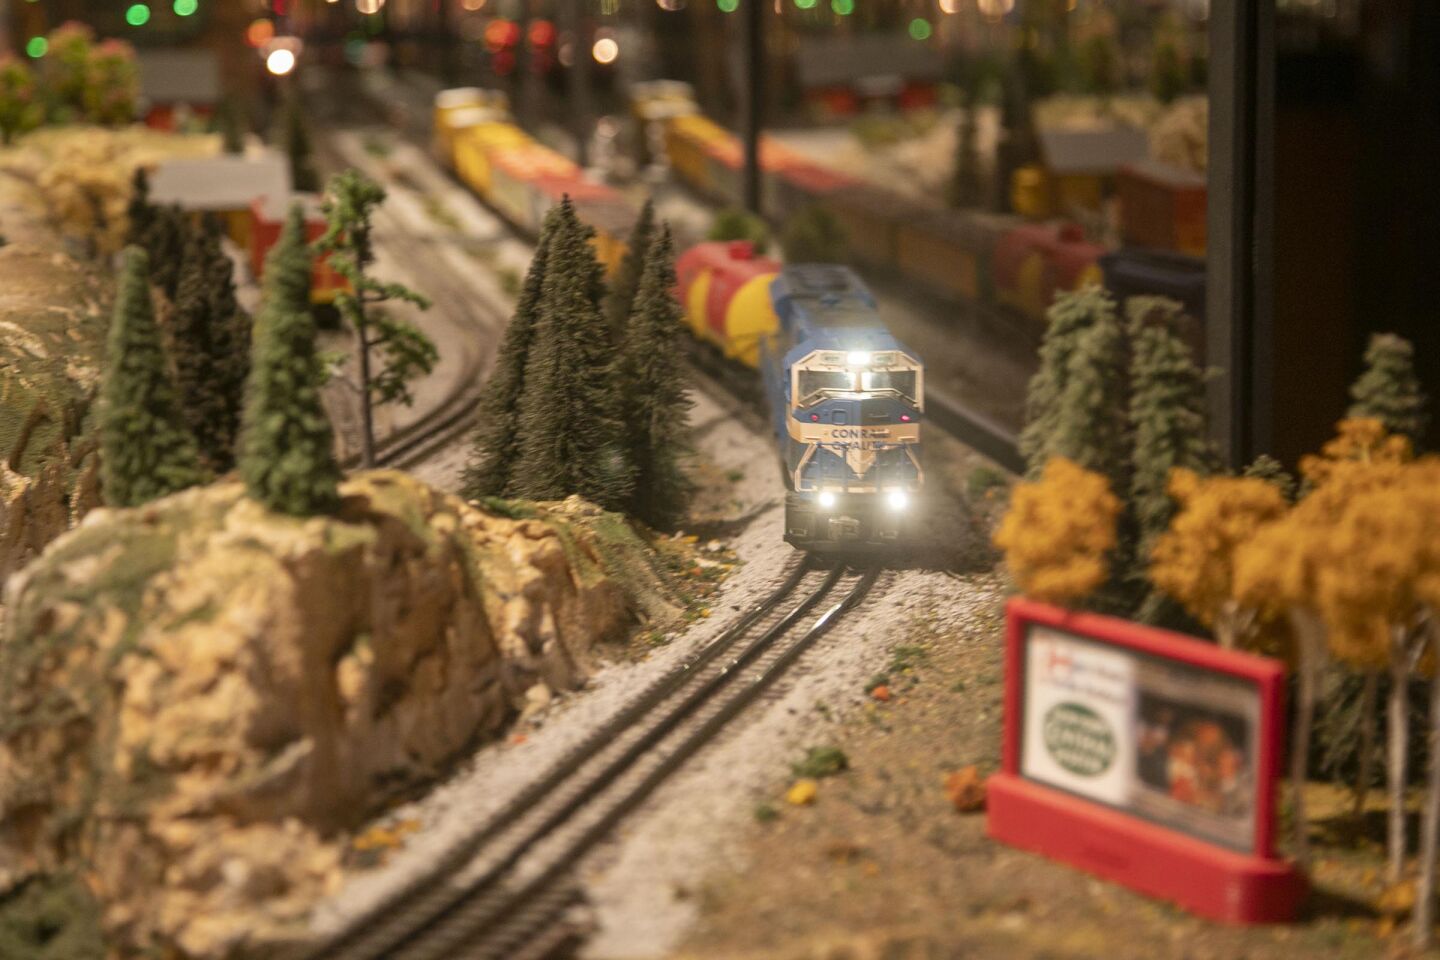 David Lizerbram and his wife Mana Monzavi took over the Old Town Model Railroad Depot, which was in danger of closing. The extensive train layout and its detailed and sometimes humorous dioramas was photographed on Friday, Dec. 13, 2019, at its Old Town, San Diego location.